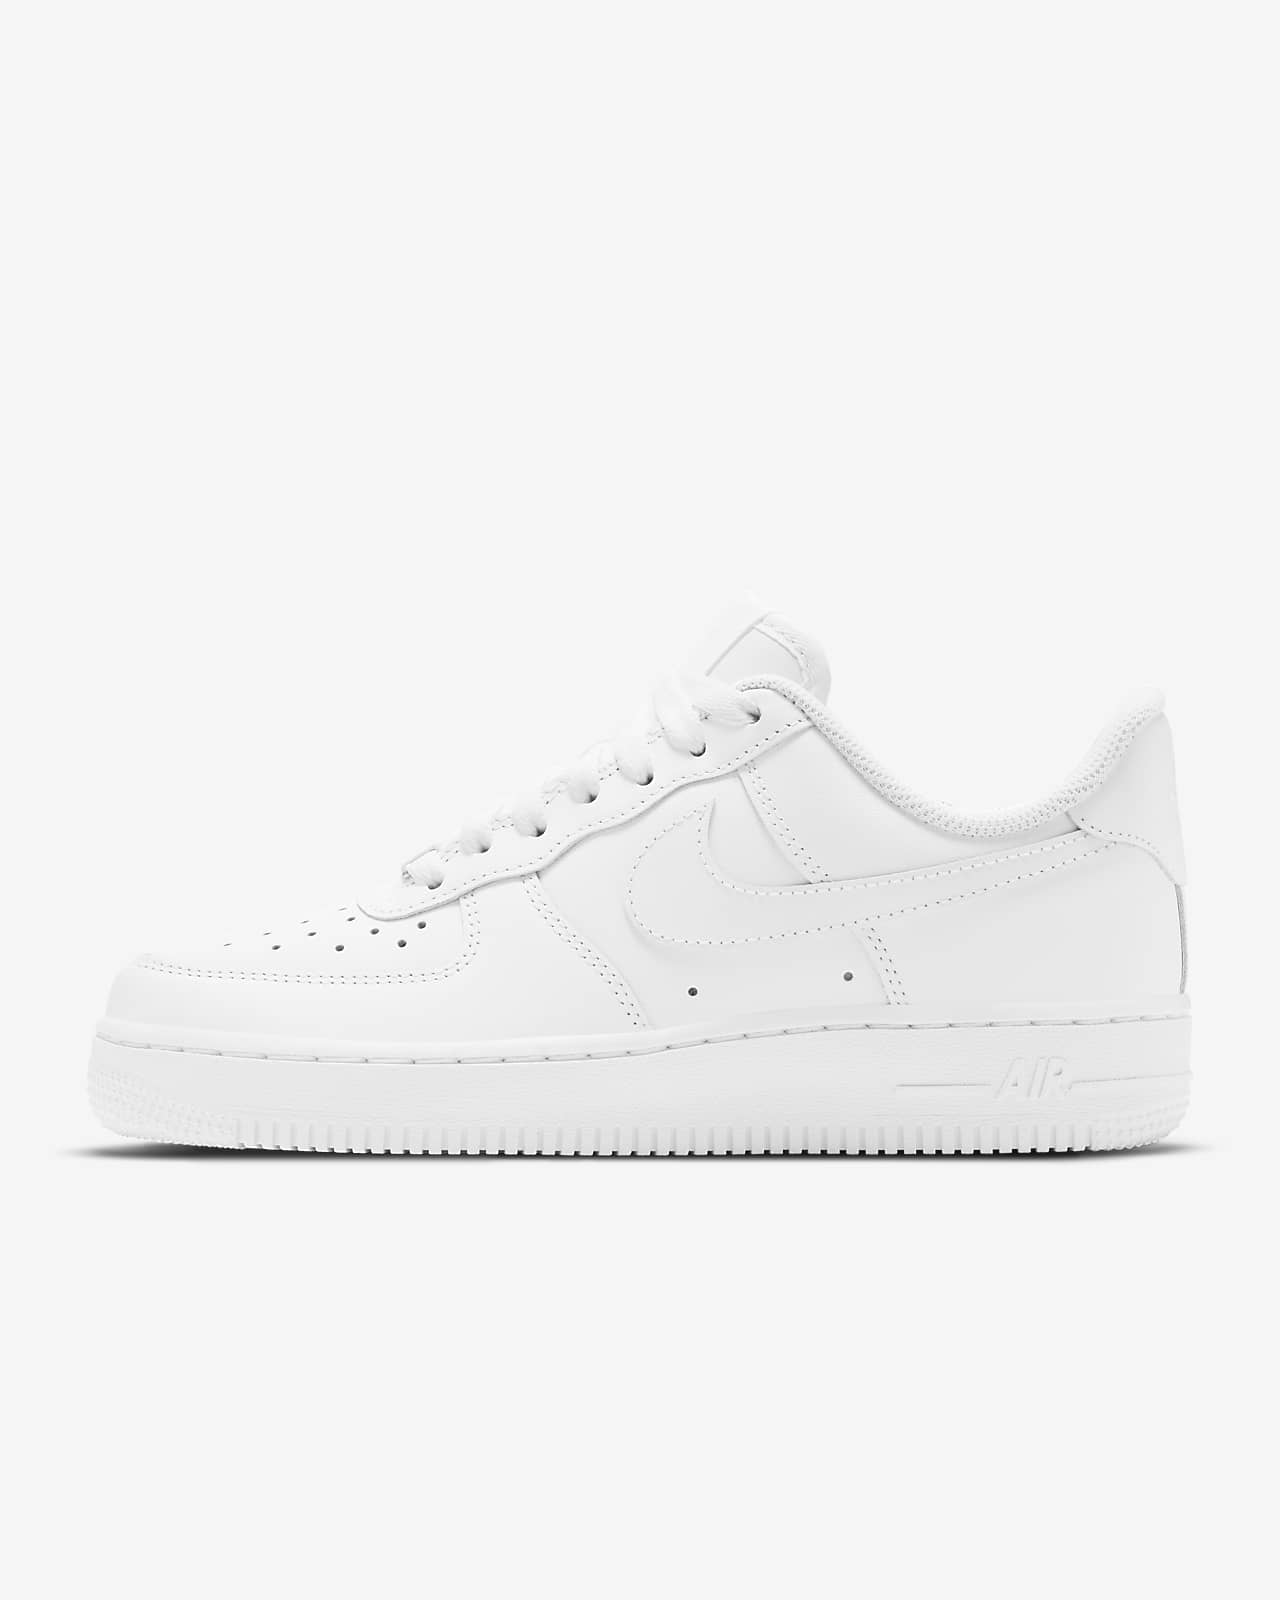 where can i buy air force 1s